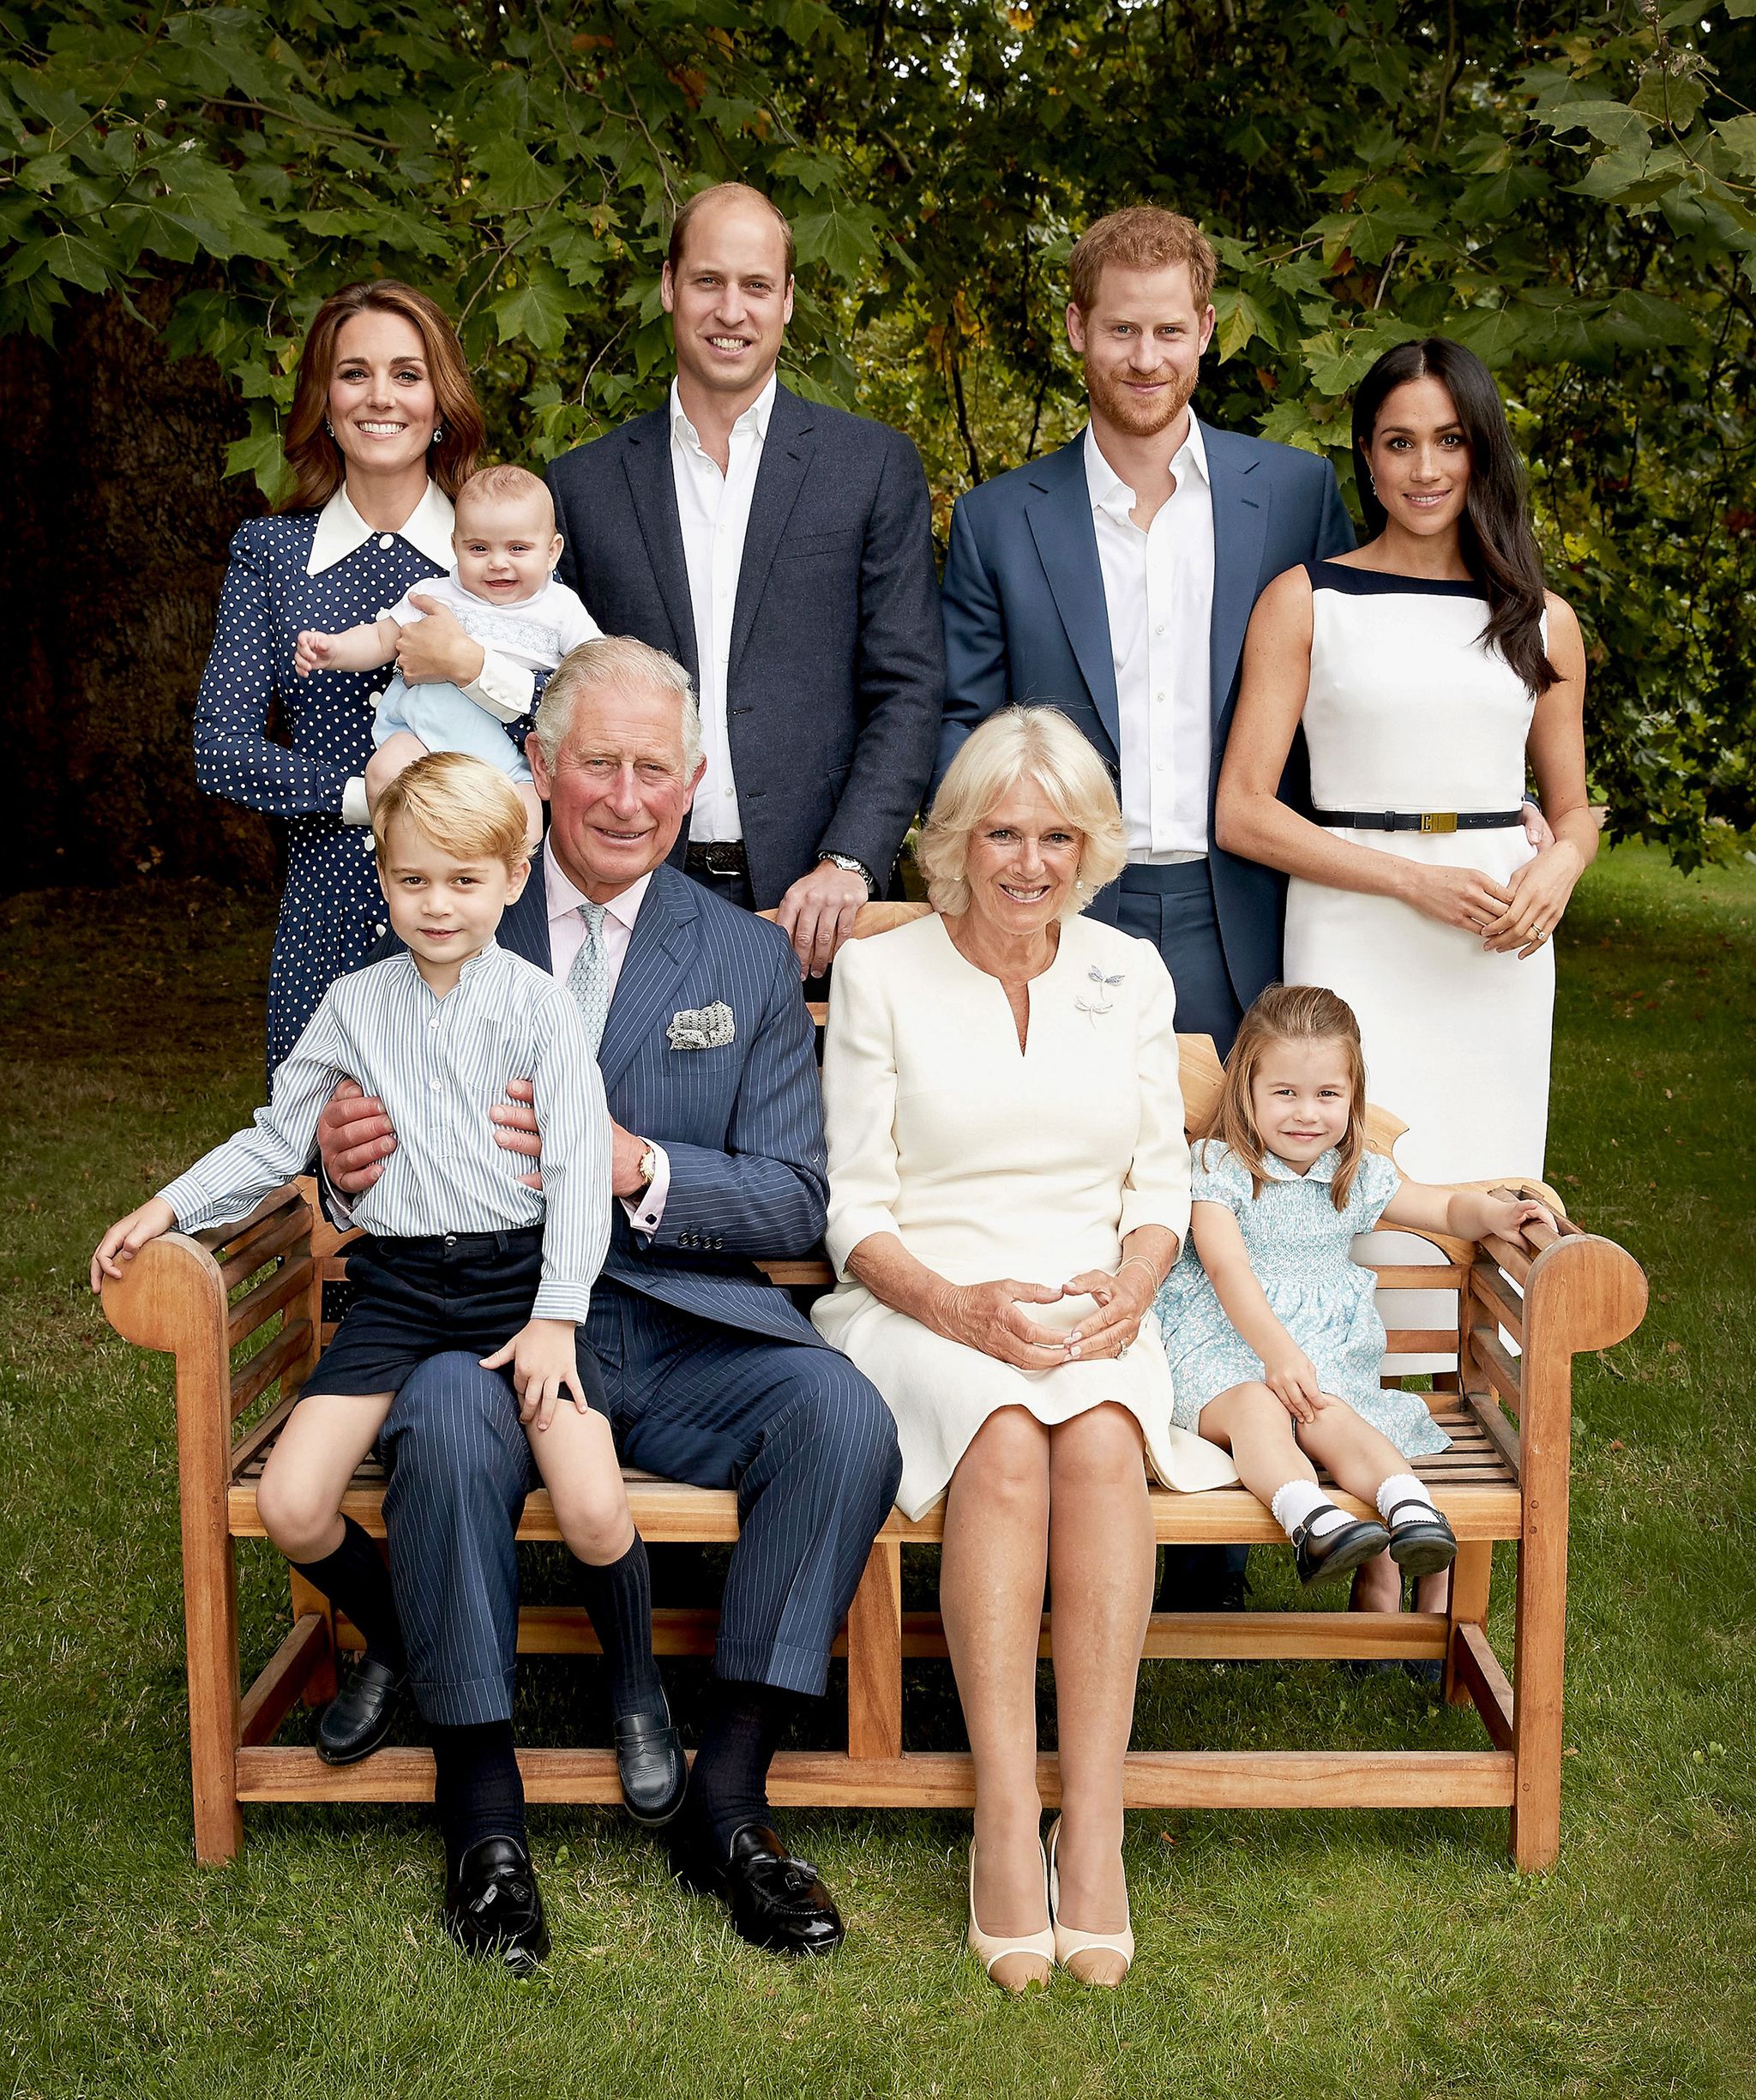 Prince Charles' 70th birthday portrait is a sweet family photo